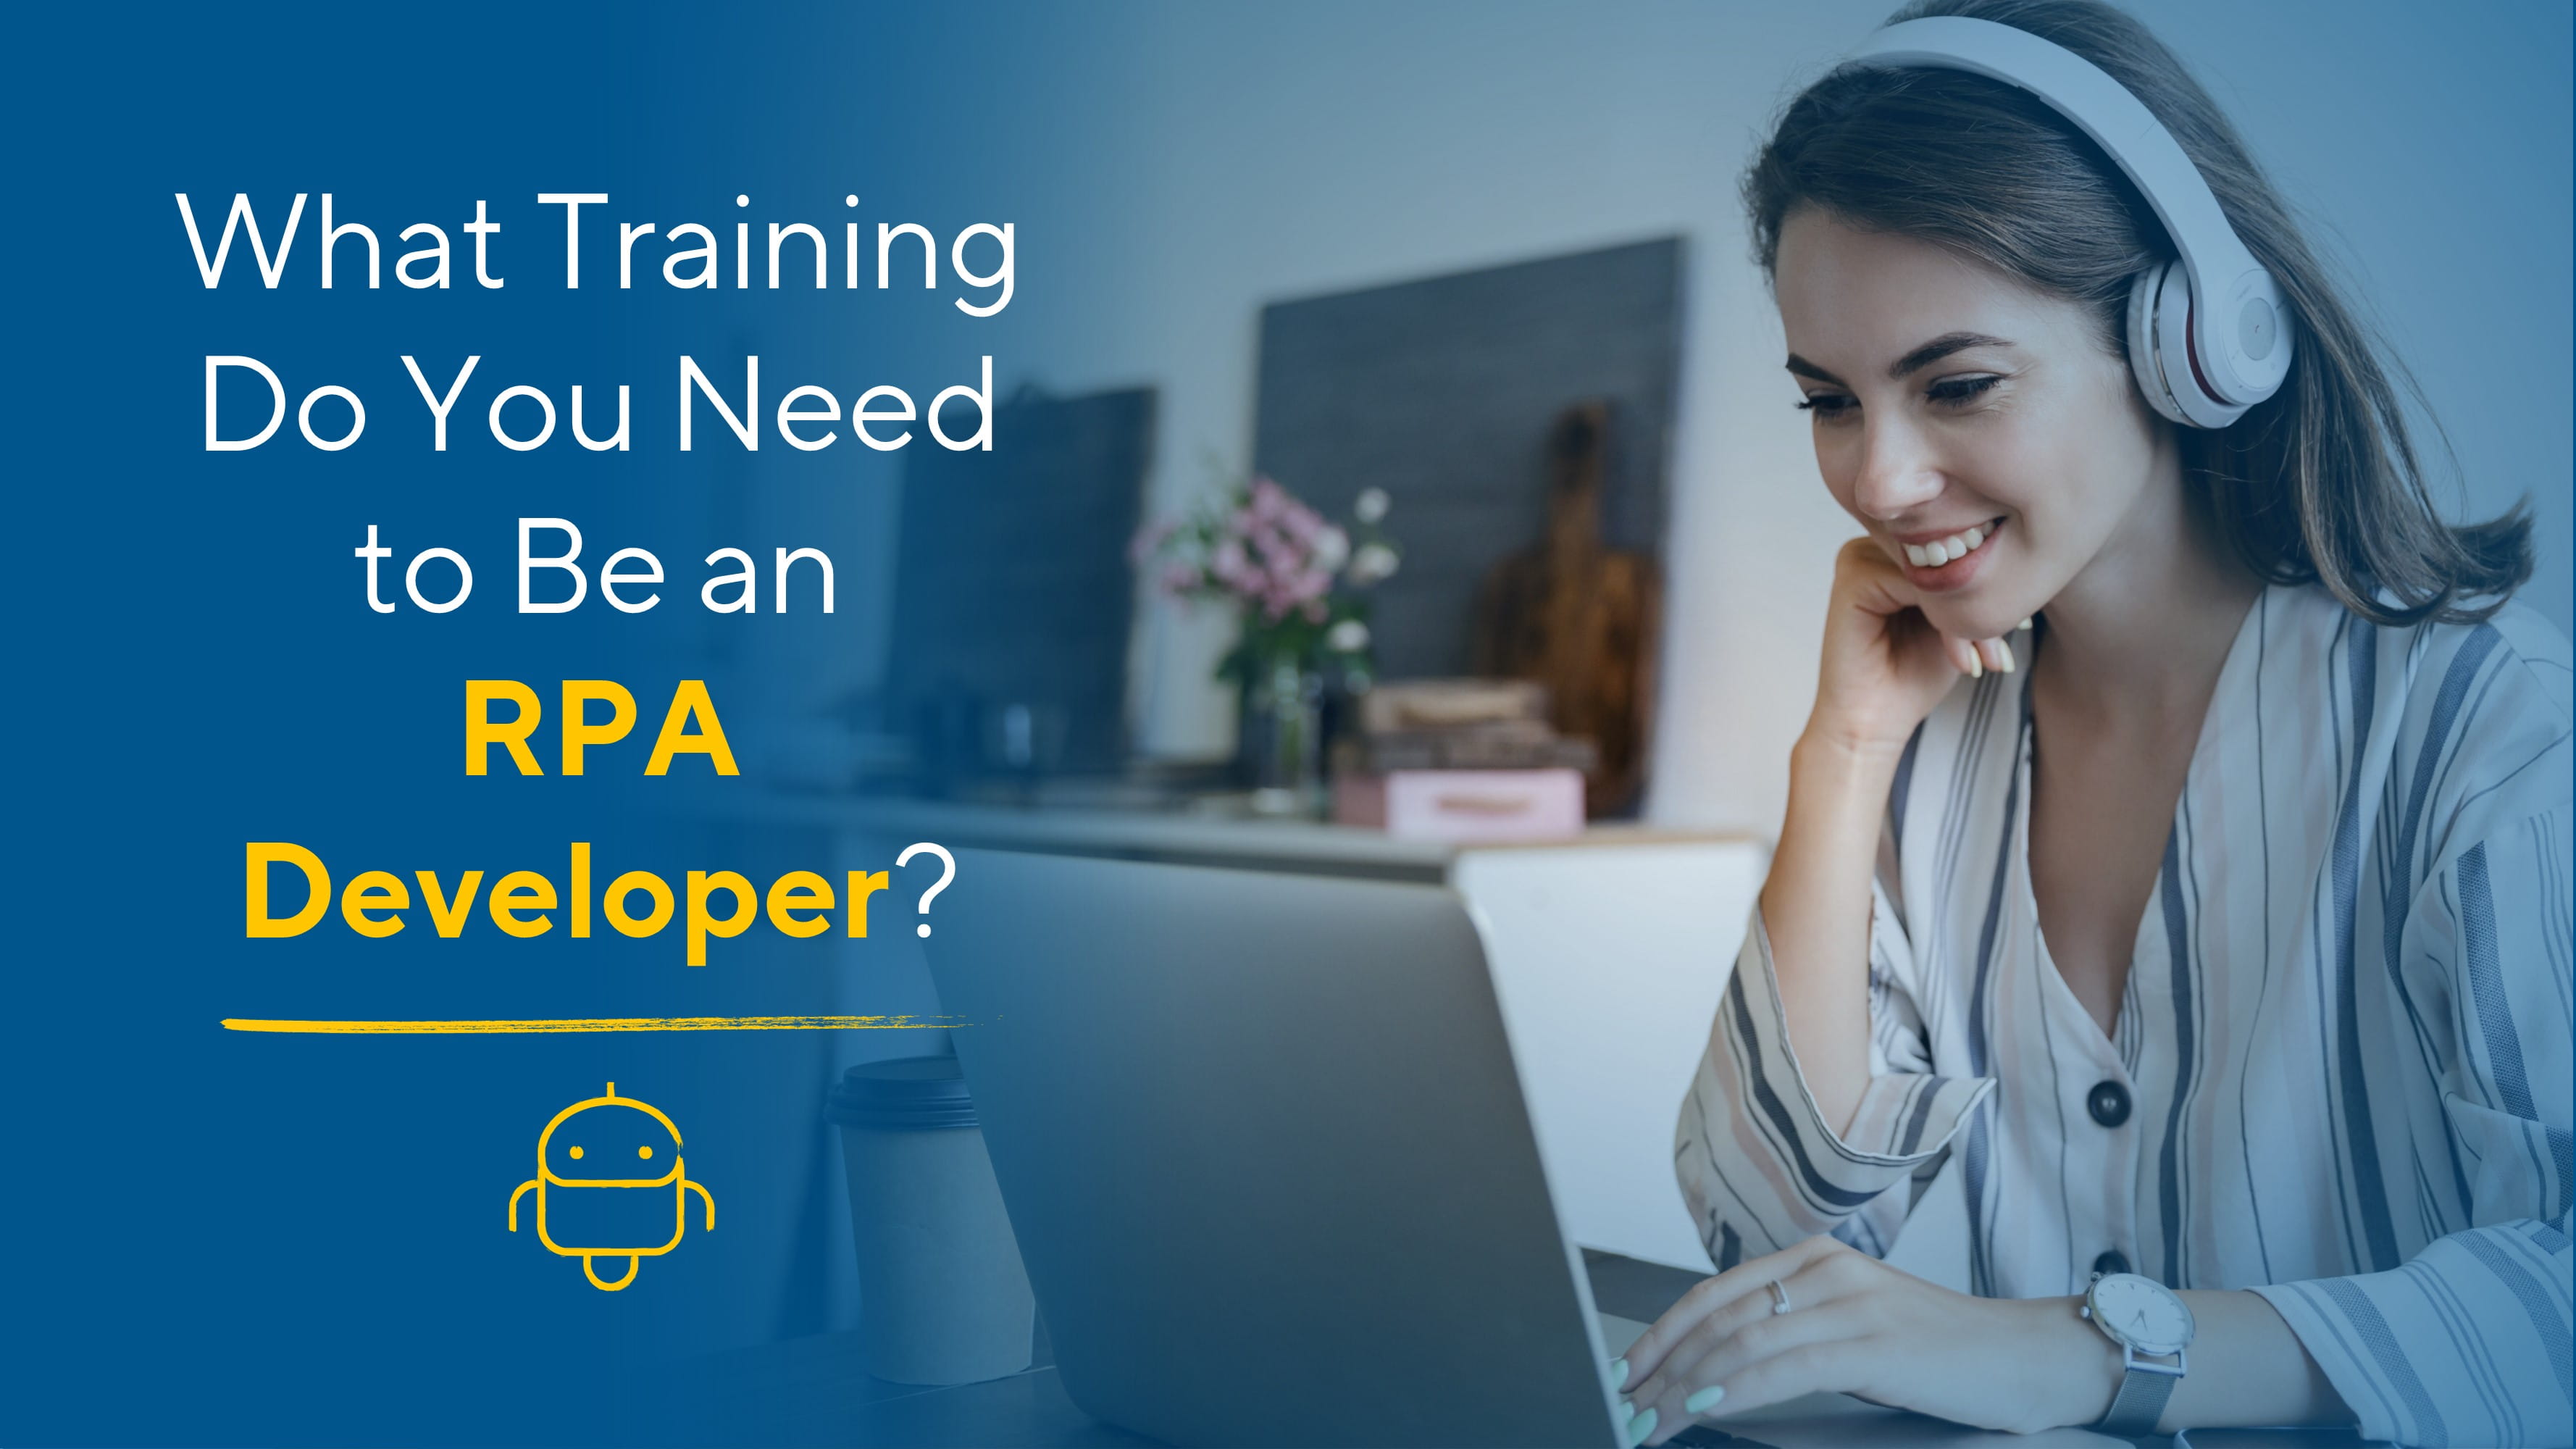 Online courses in RPA are abundant and often sponsored in partnership with leading providers of the technology.